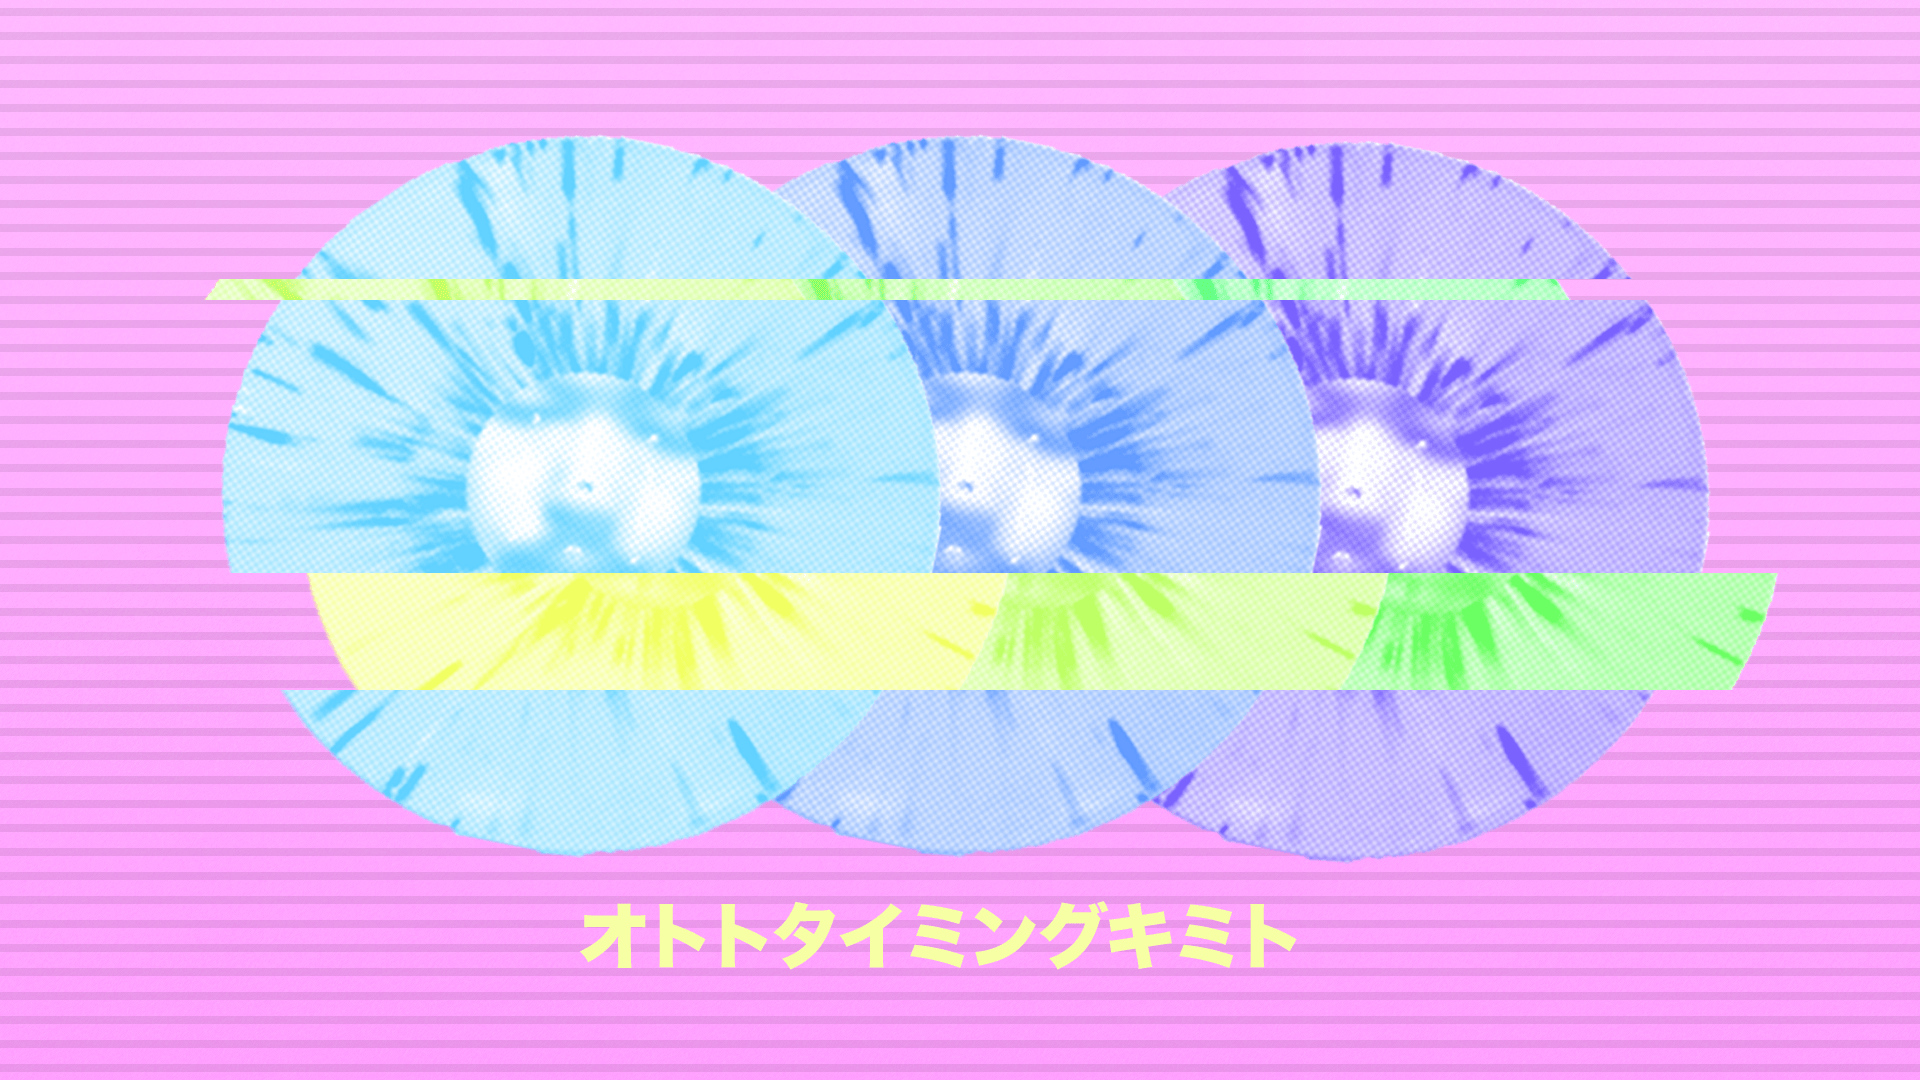 A Vaporwave style image of three vinyl records on a pink background with Japanese text. - Windows 95, 1920x1080